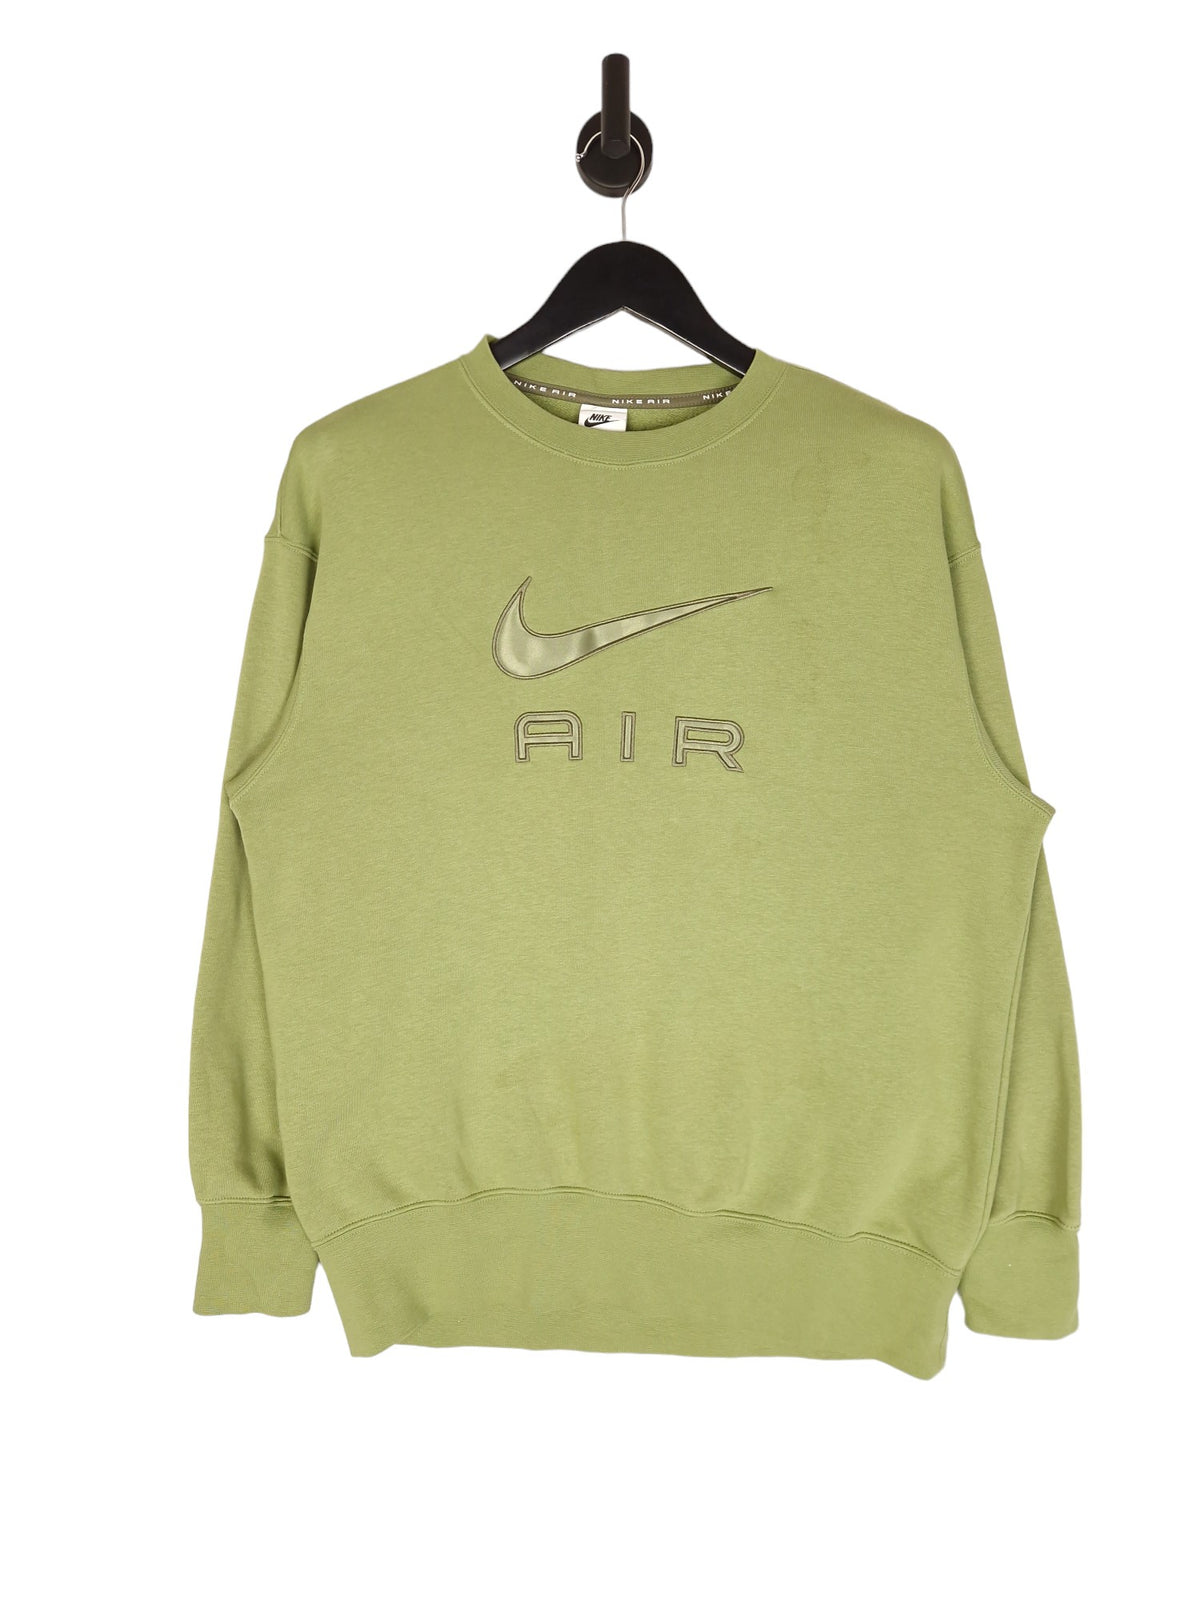 Nike Air Spell Out Sweatshirt - Size XS